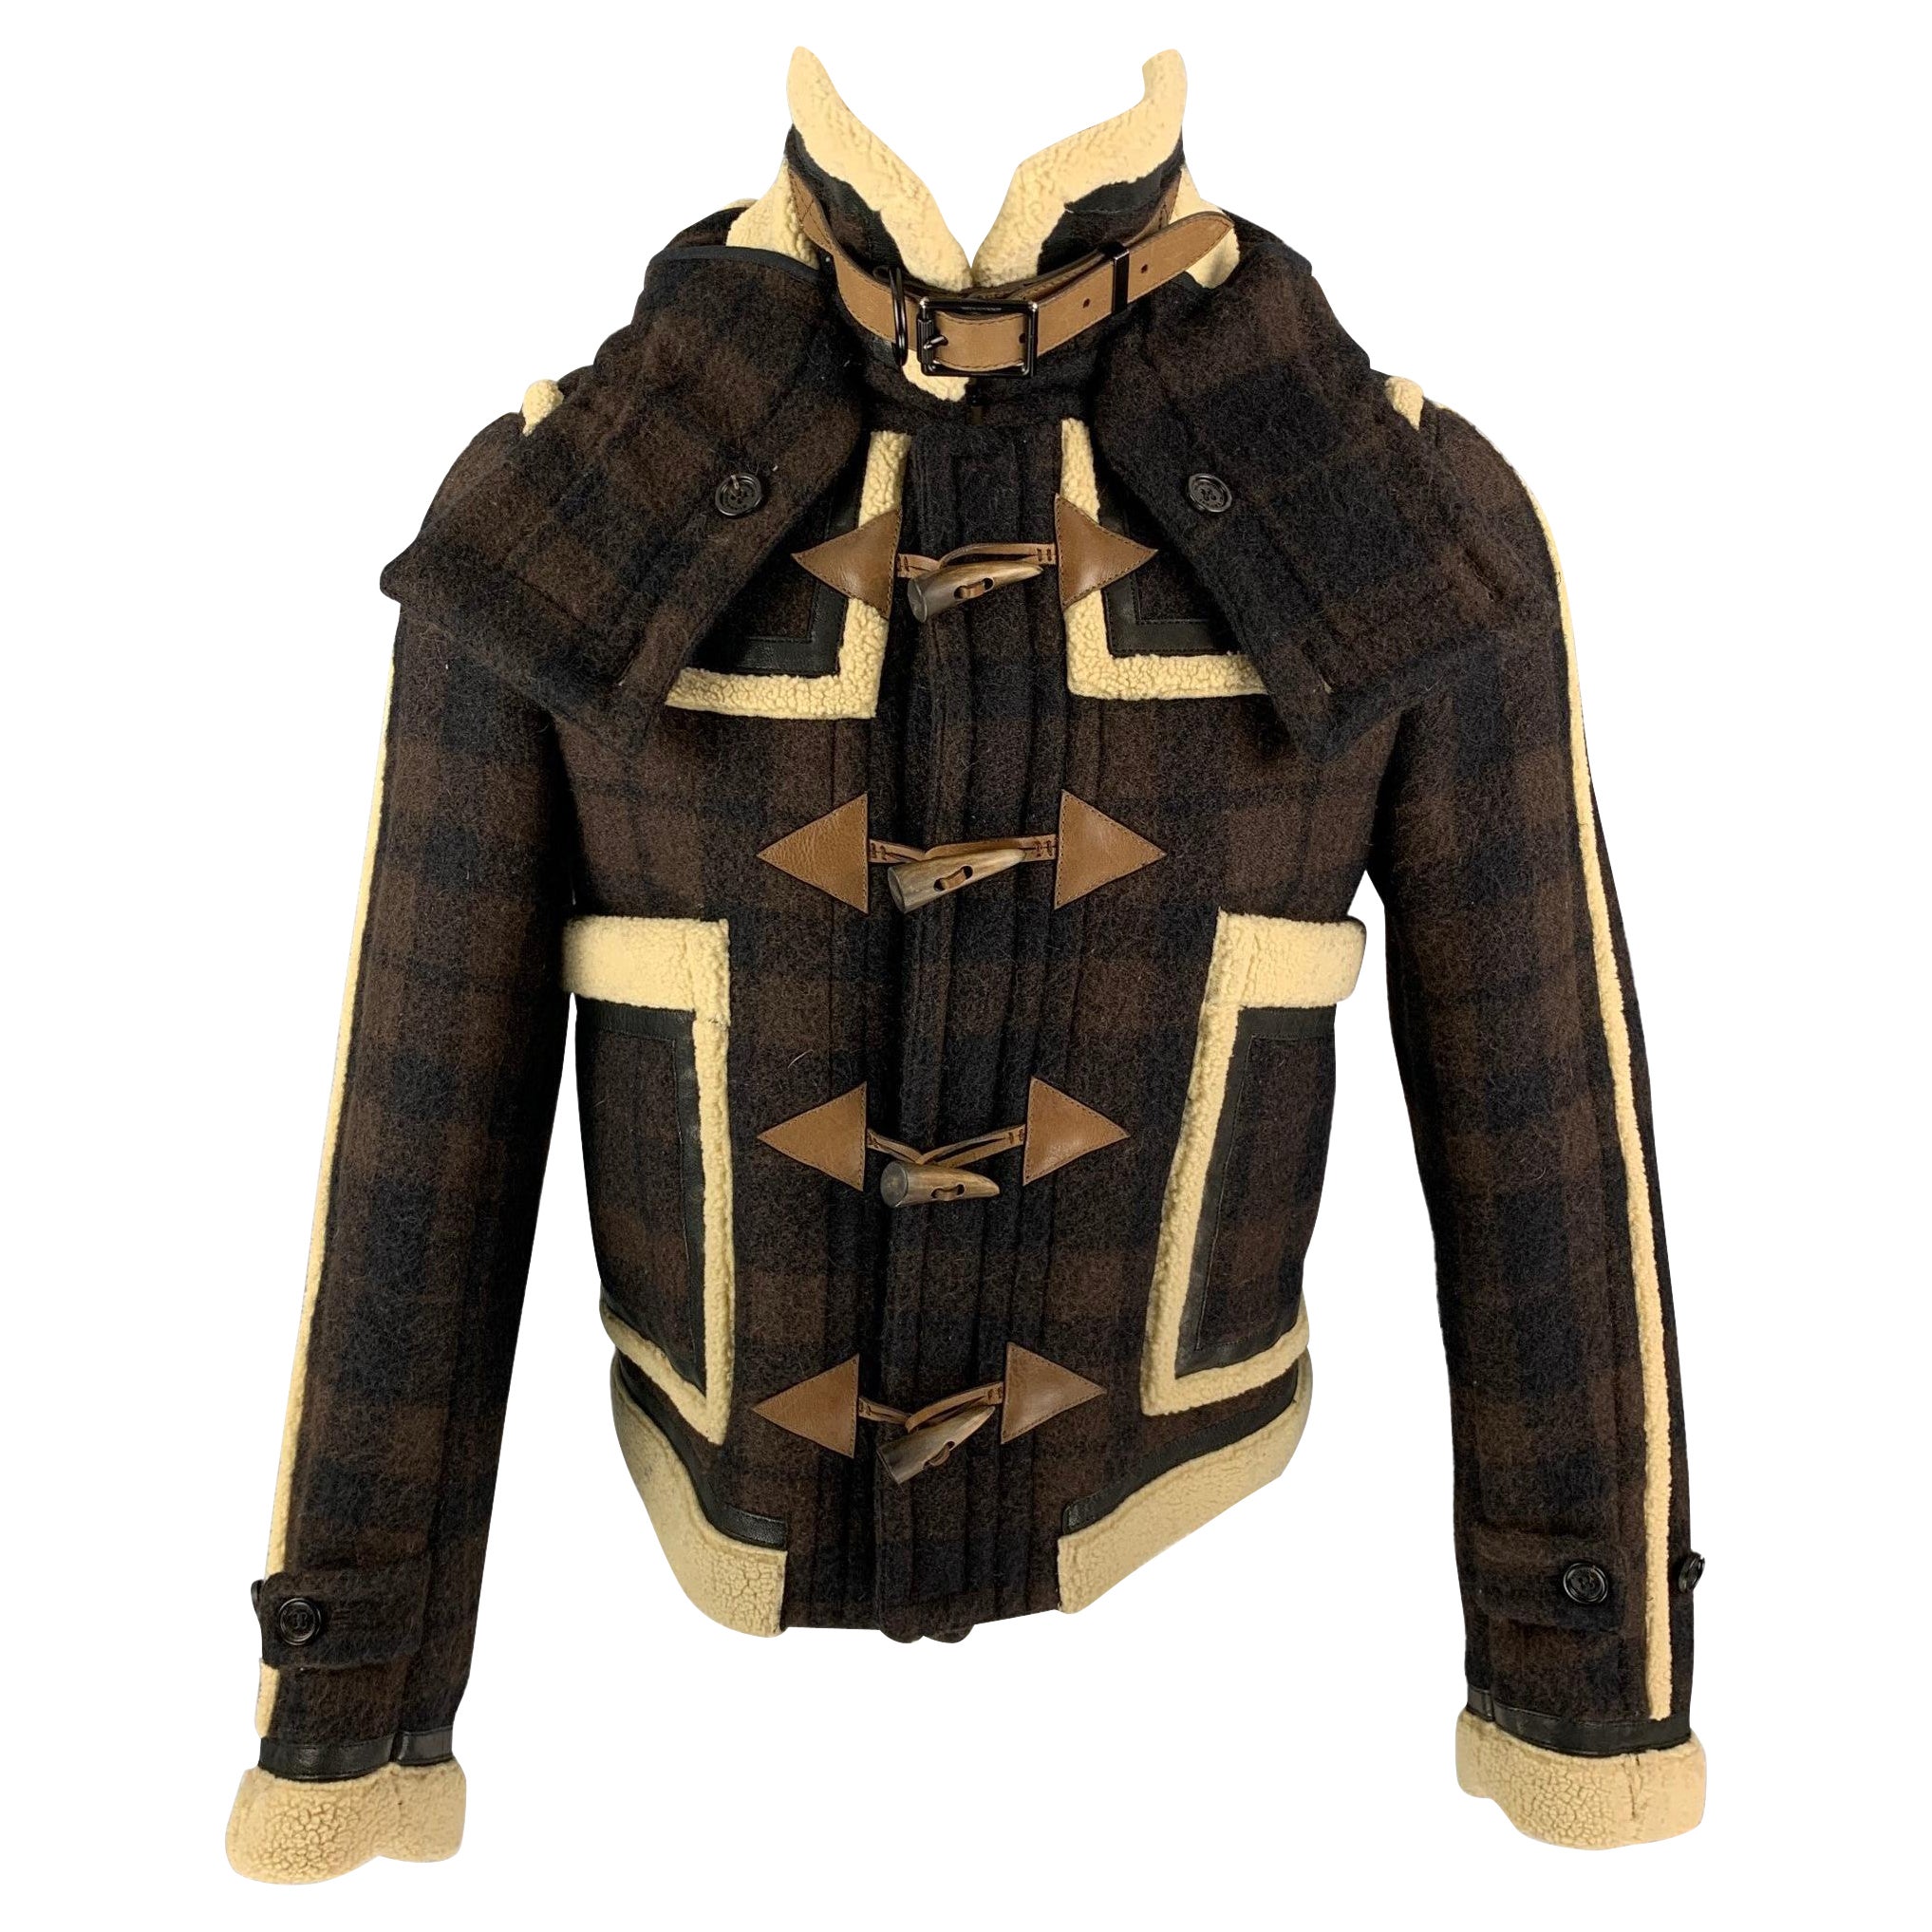 BURBERRY PRORSUM Fall 2011 Size 34 Brown & Cream Plaid Leather Shearling Jacket